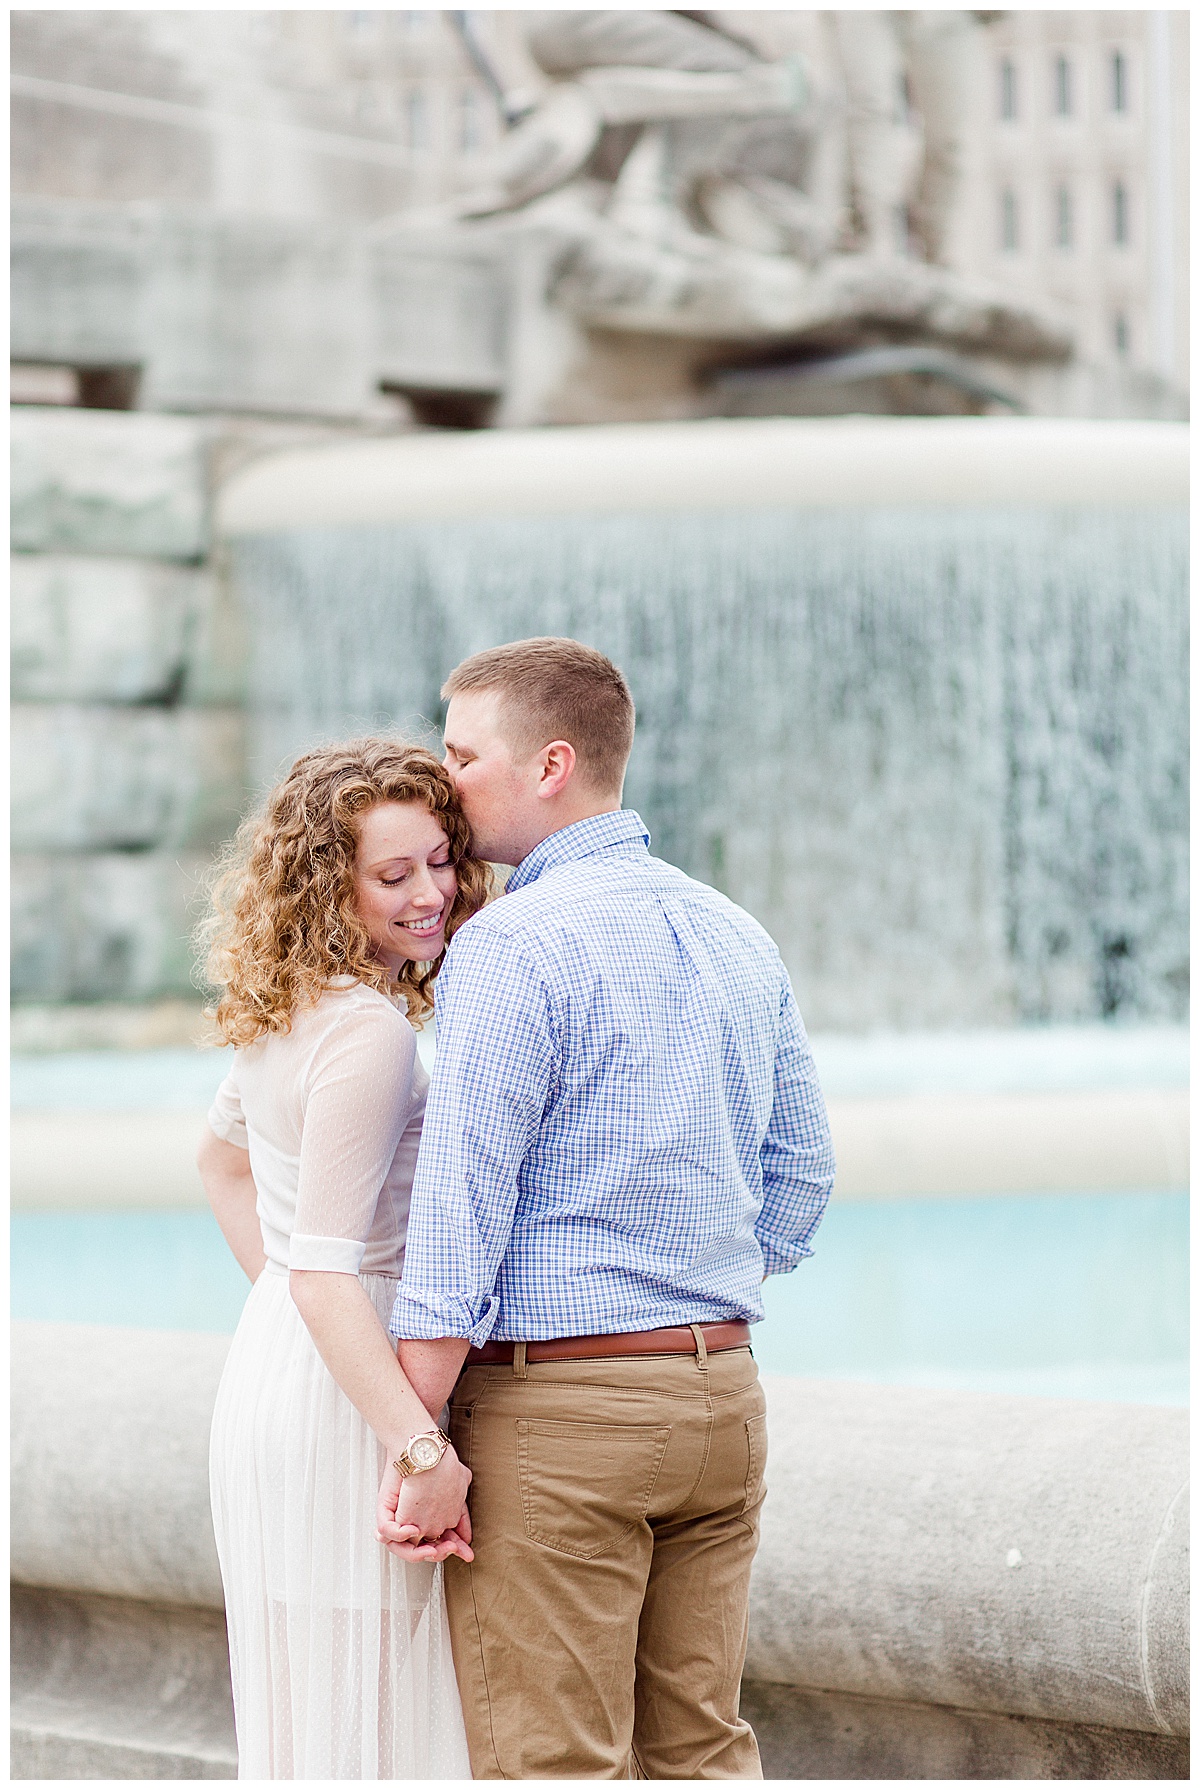 Kaitlin Mendoza Photography captured Monument Circle engagement photos for Sondra and Dylan